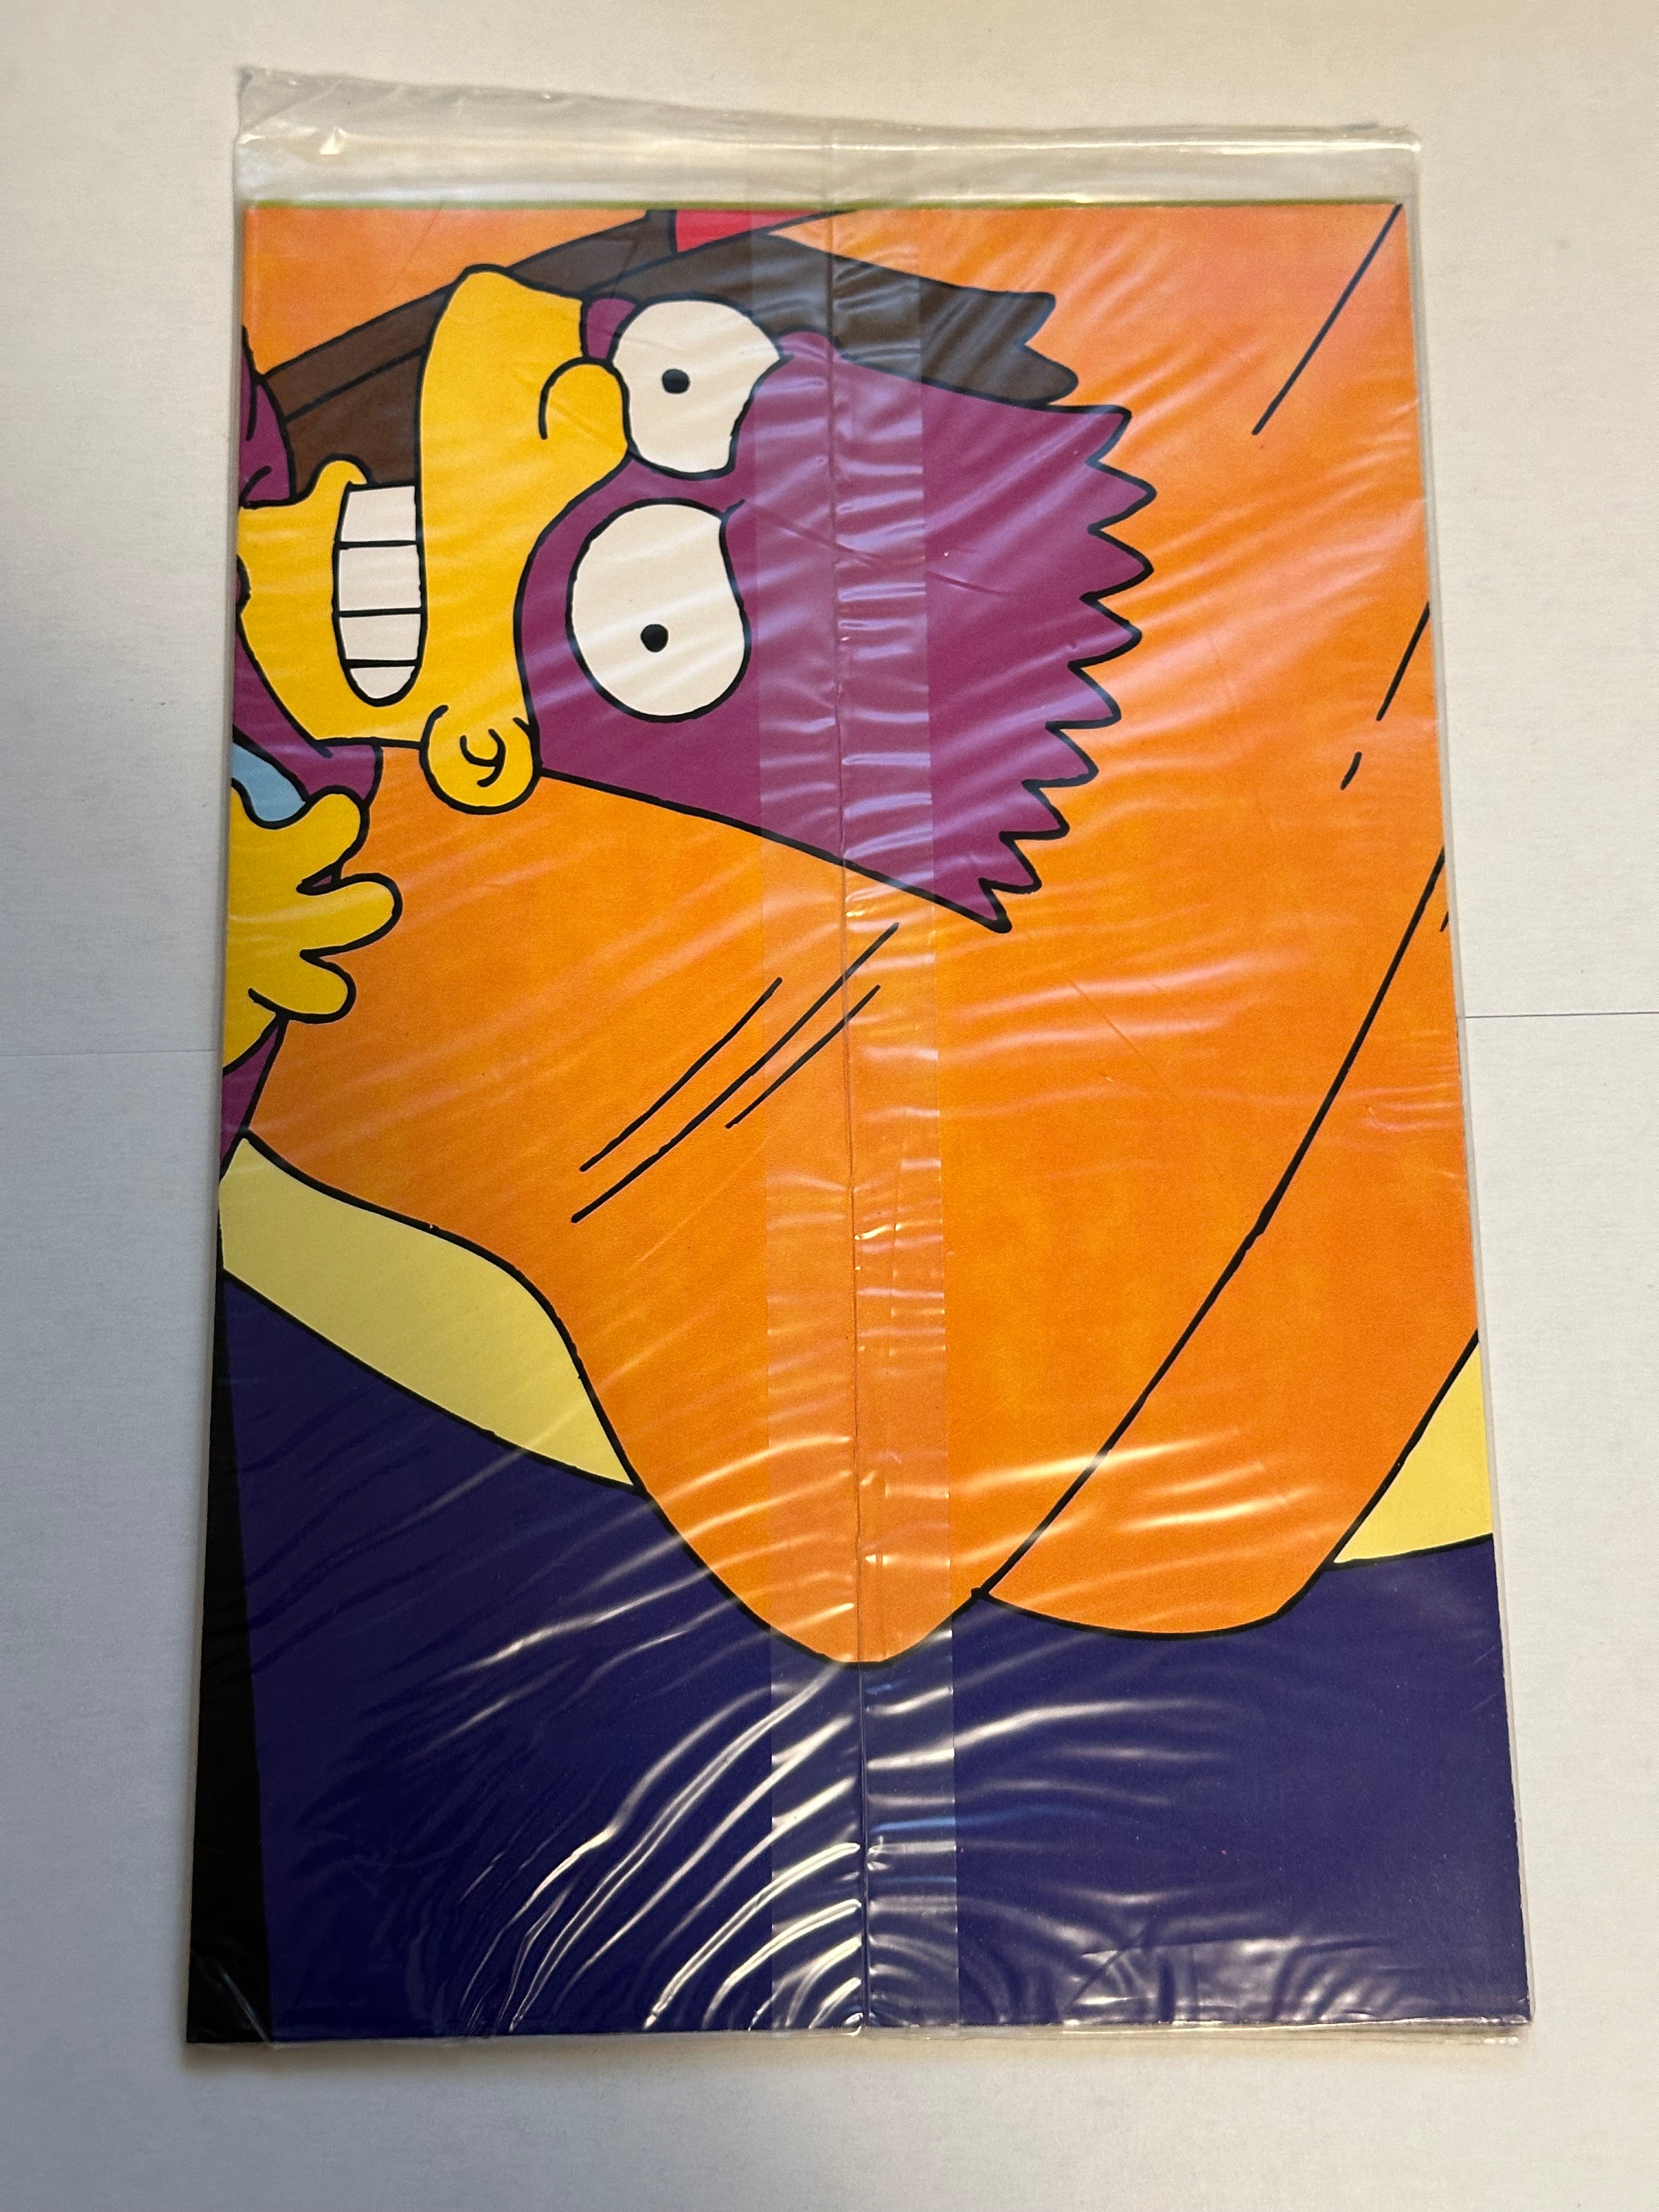 Simpsons Comics and Stories #1 factory sealed with poster high grade condition comic 1993